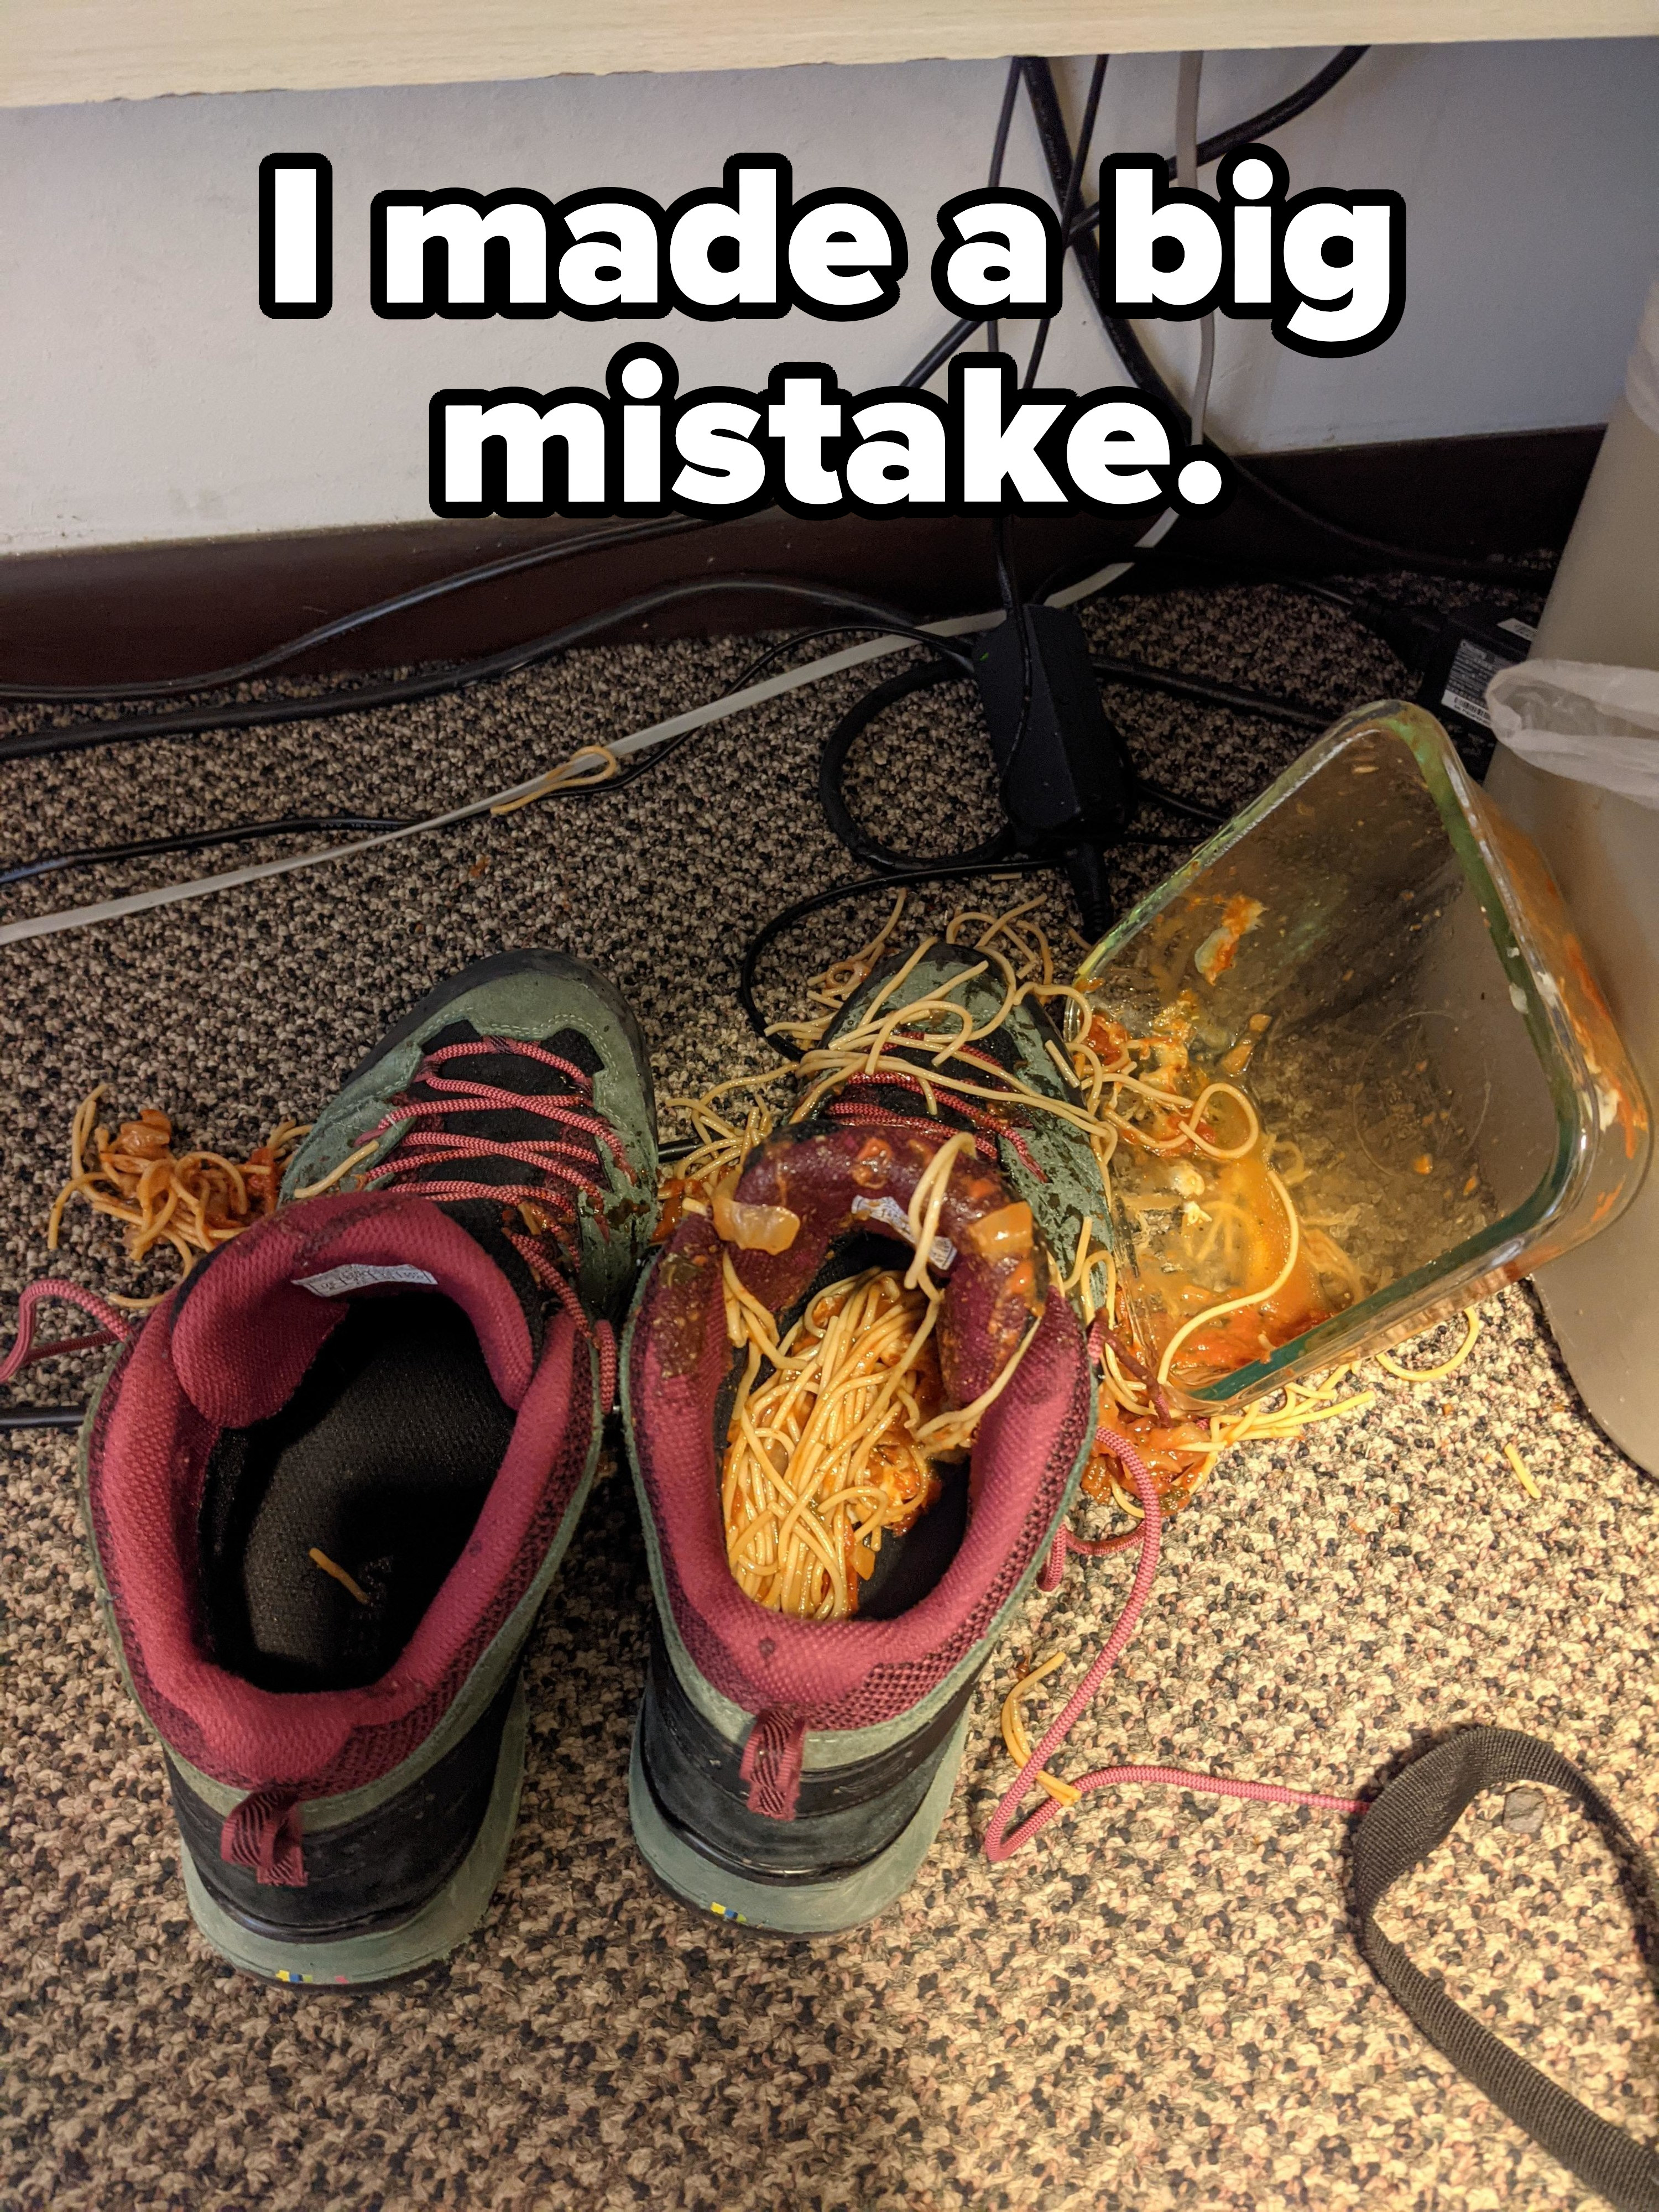 Cooked spaghetti and sauce spilled in a shoe